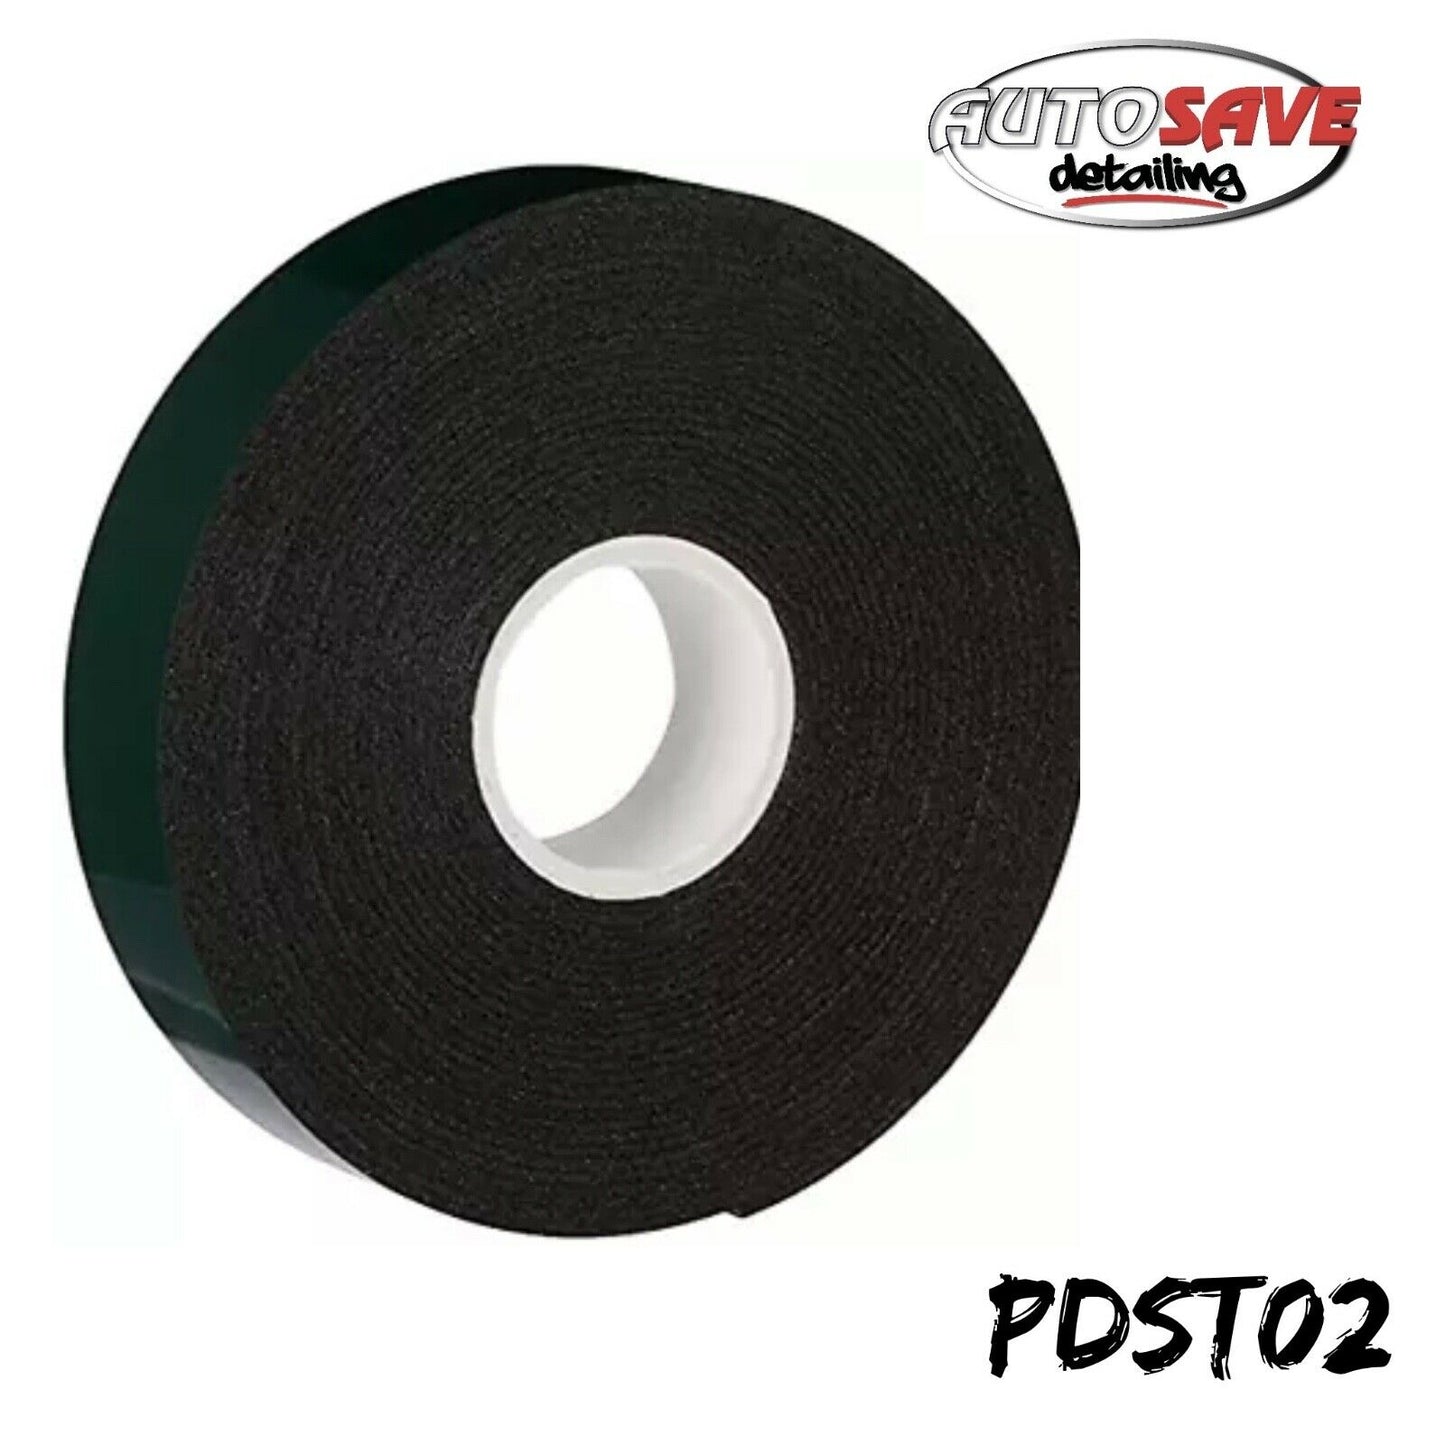 Pearl Consumables PDST02, Double Sided Tape - 18mm x 5m